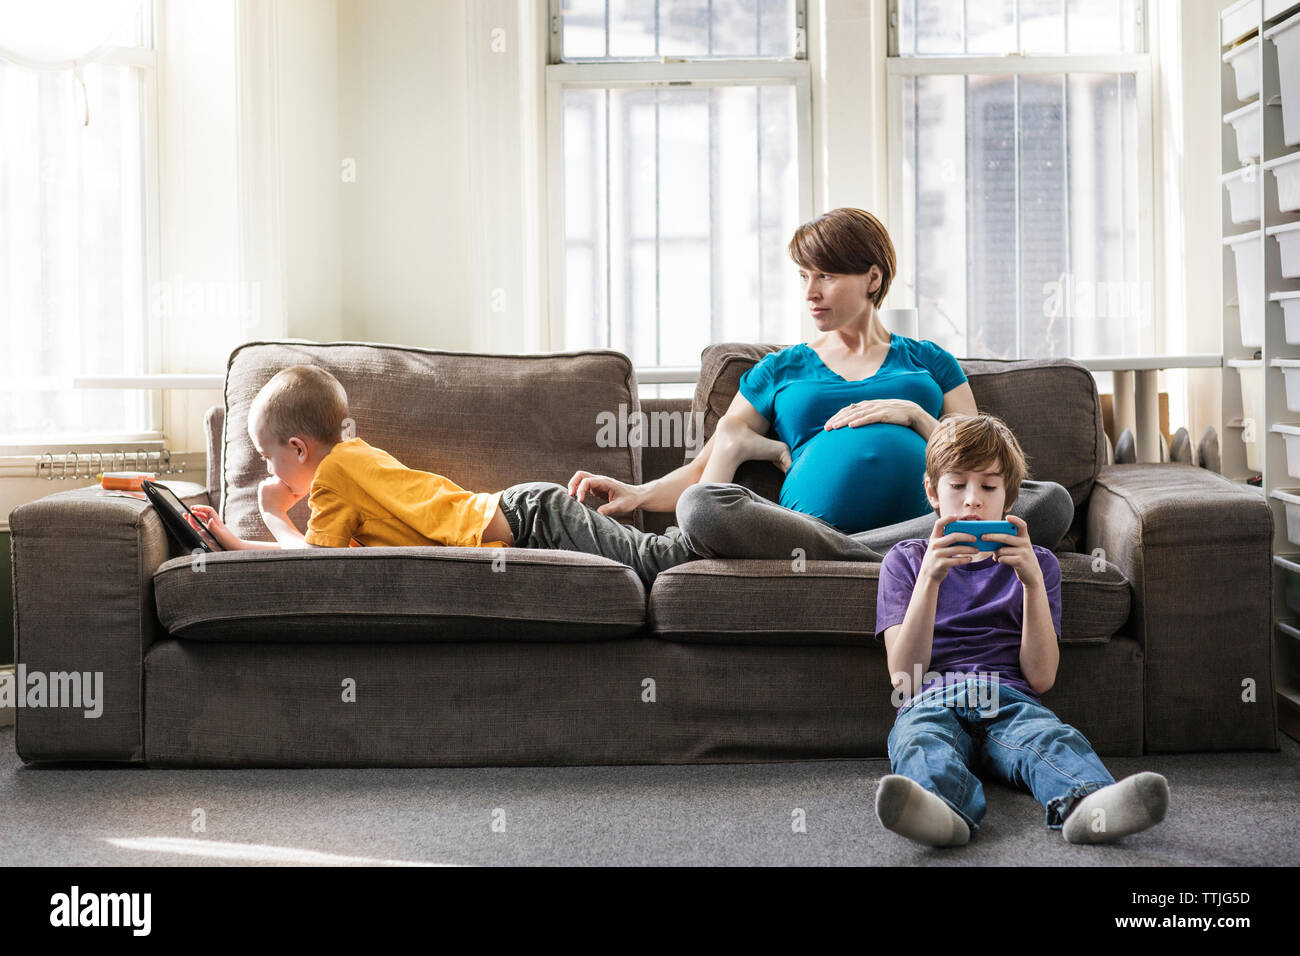 Pregnant woman with children at home Stock Photo